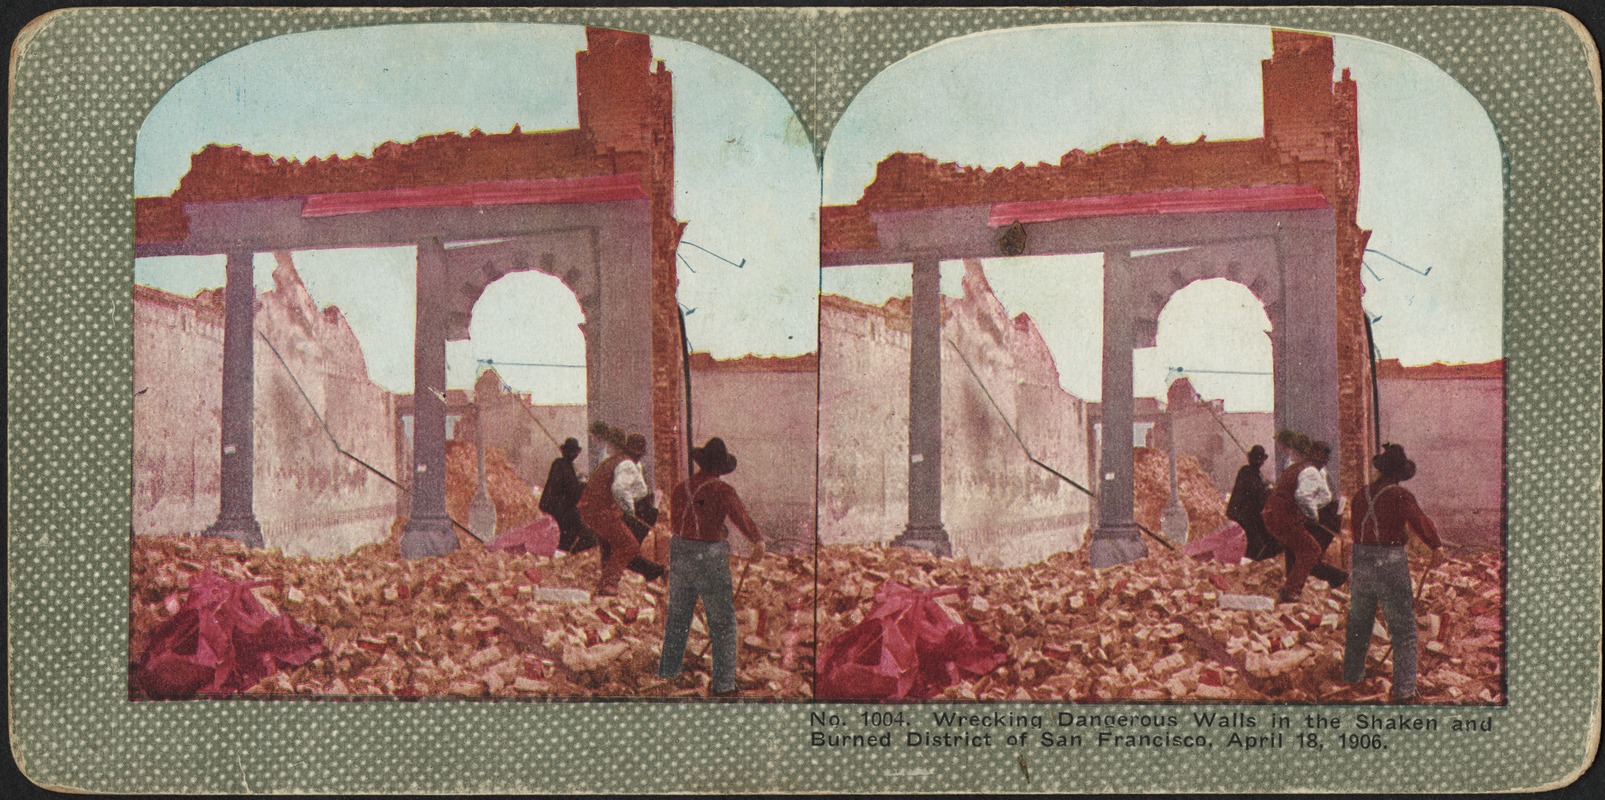 Wrecking dangerous walls in the shaken and burned district of San Francisco, April 18, 1906